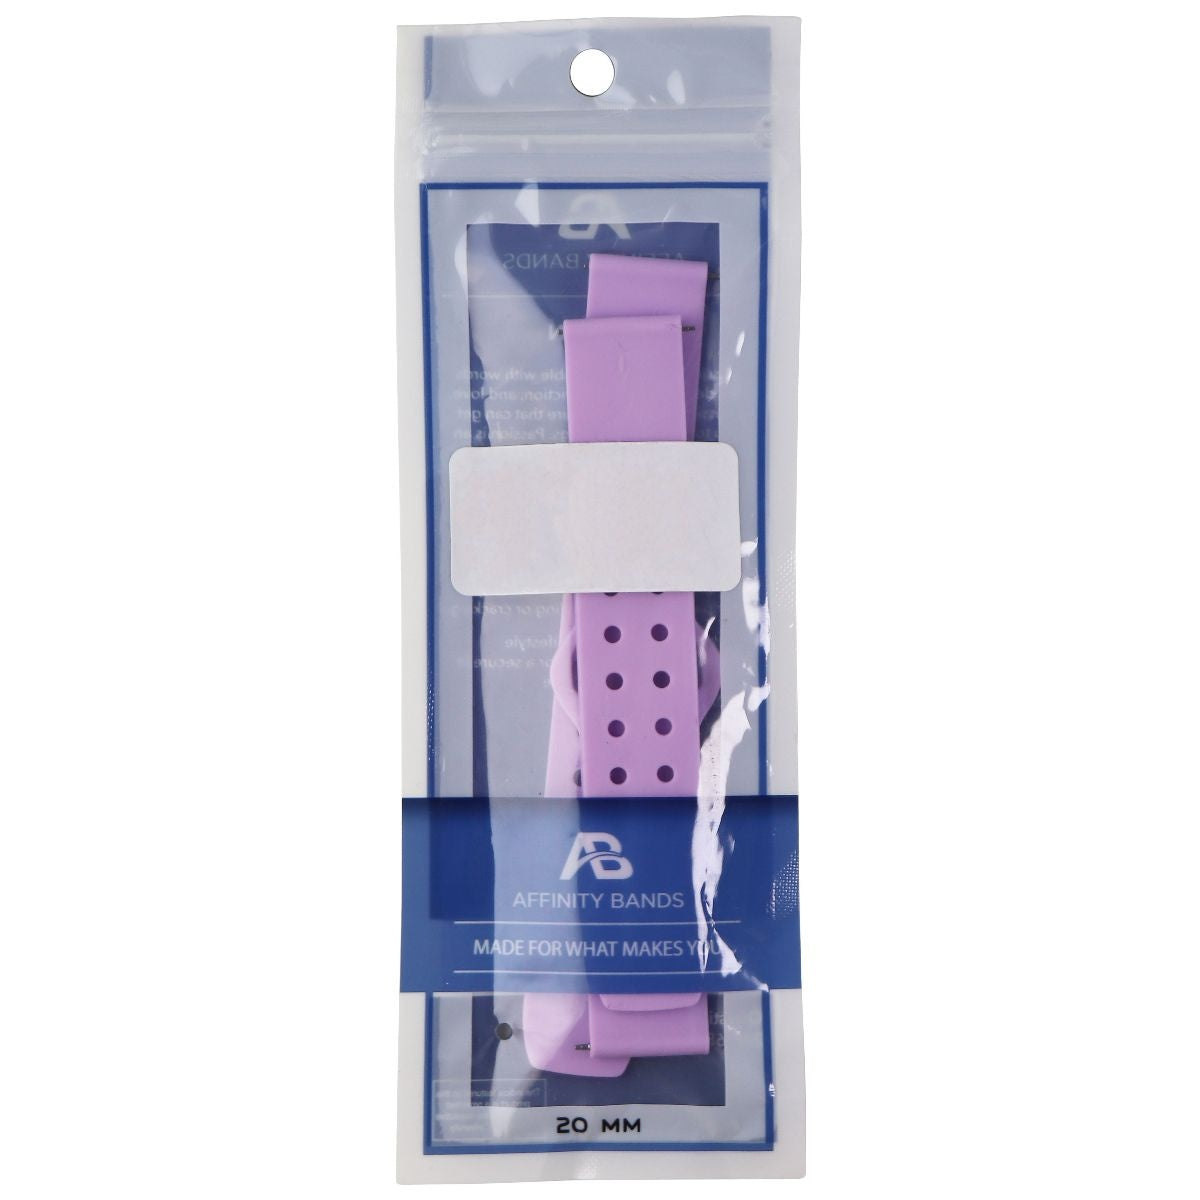 Affinity 20mm Silicone Band for Smartwatches, Watches & Tracking Devices - Lilac Smart Watch Accessories - Watch Bands Affinity    - Simple Cell Bulk Wholesale Pricing - USA Seller